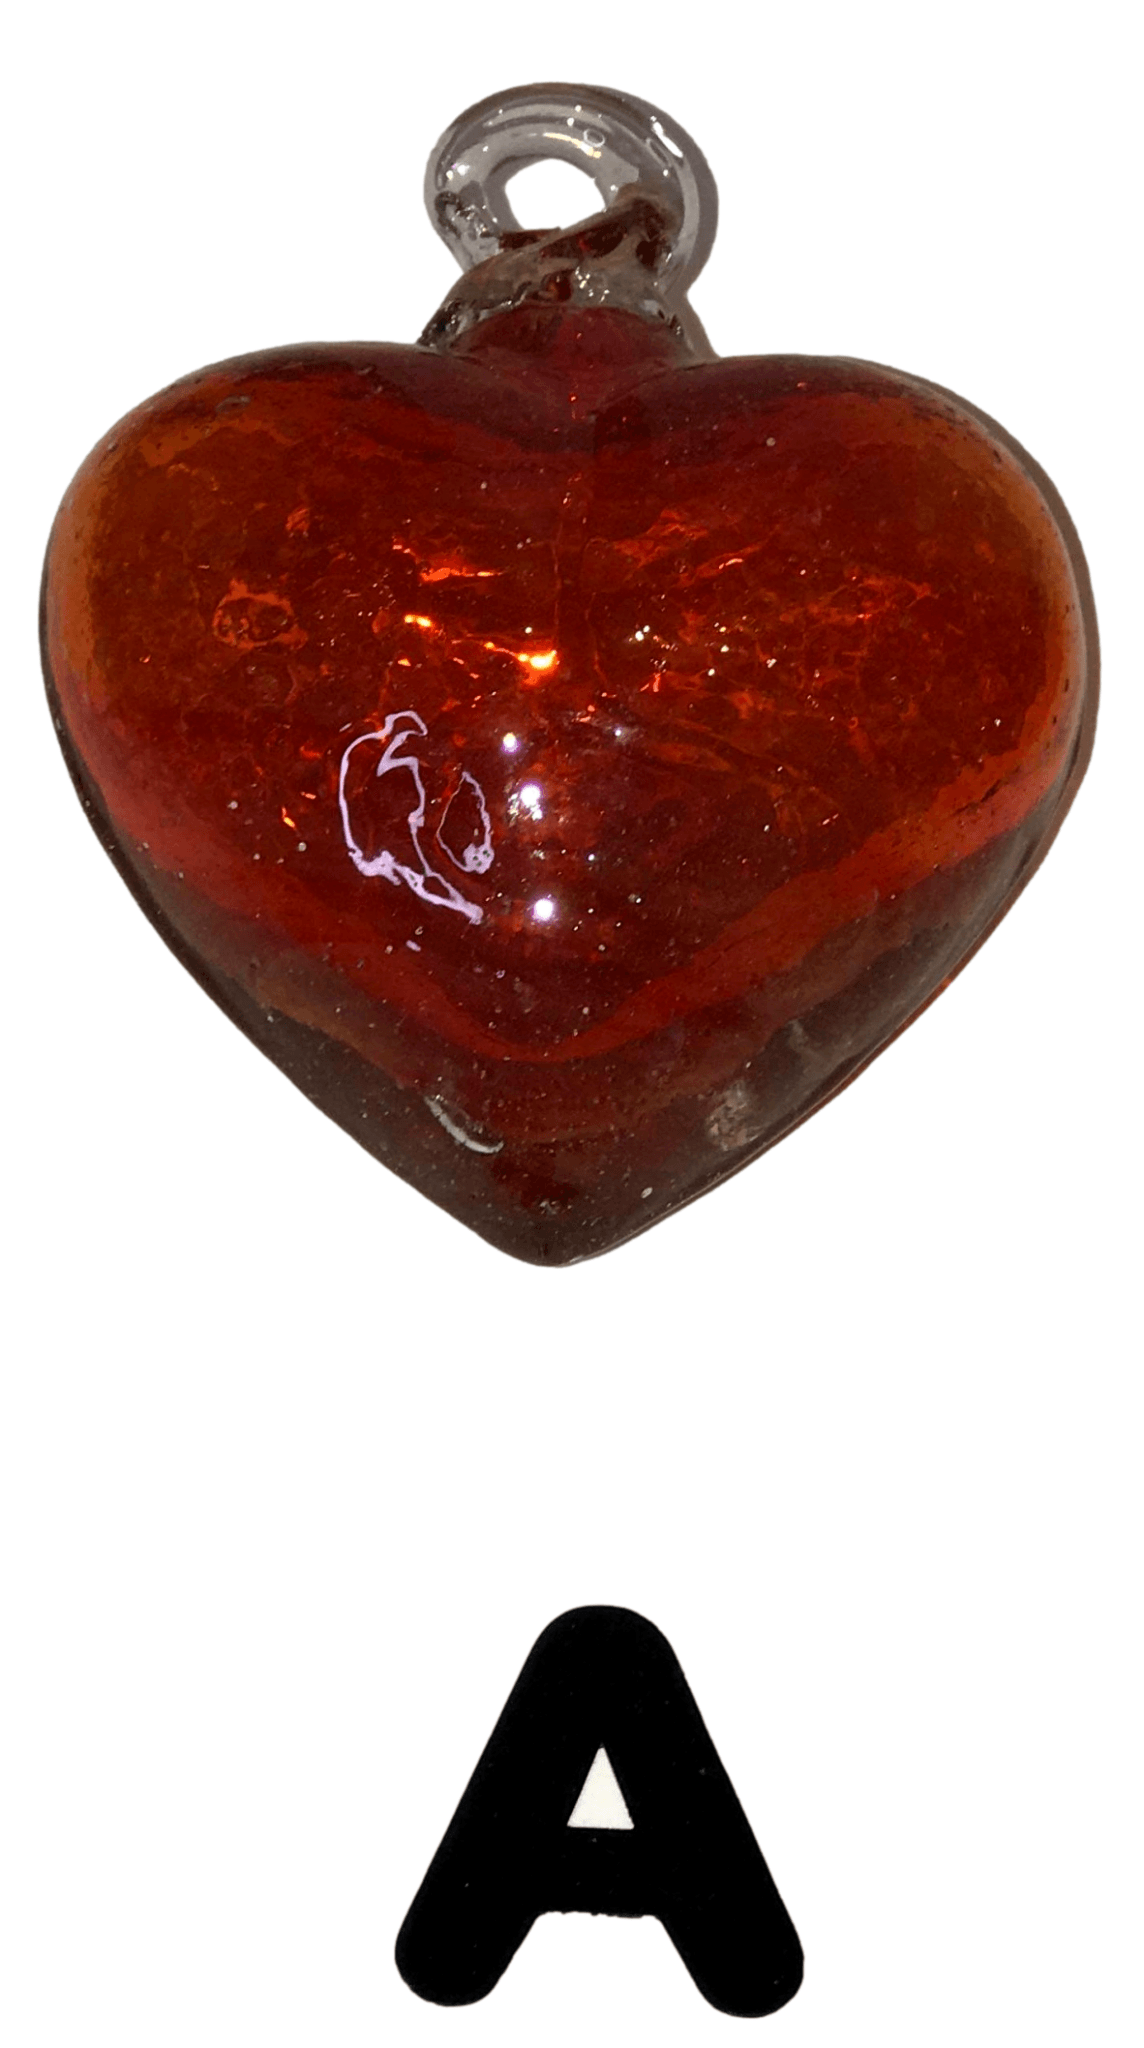 Ornament Handblown Glass Heart Red Orange Handcrafted in Mexico L: 3 inches X W: 3 inches - Ysleta Mission Gift Shop- VOTED 2022 El Paso's Best Gift Shop